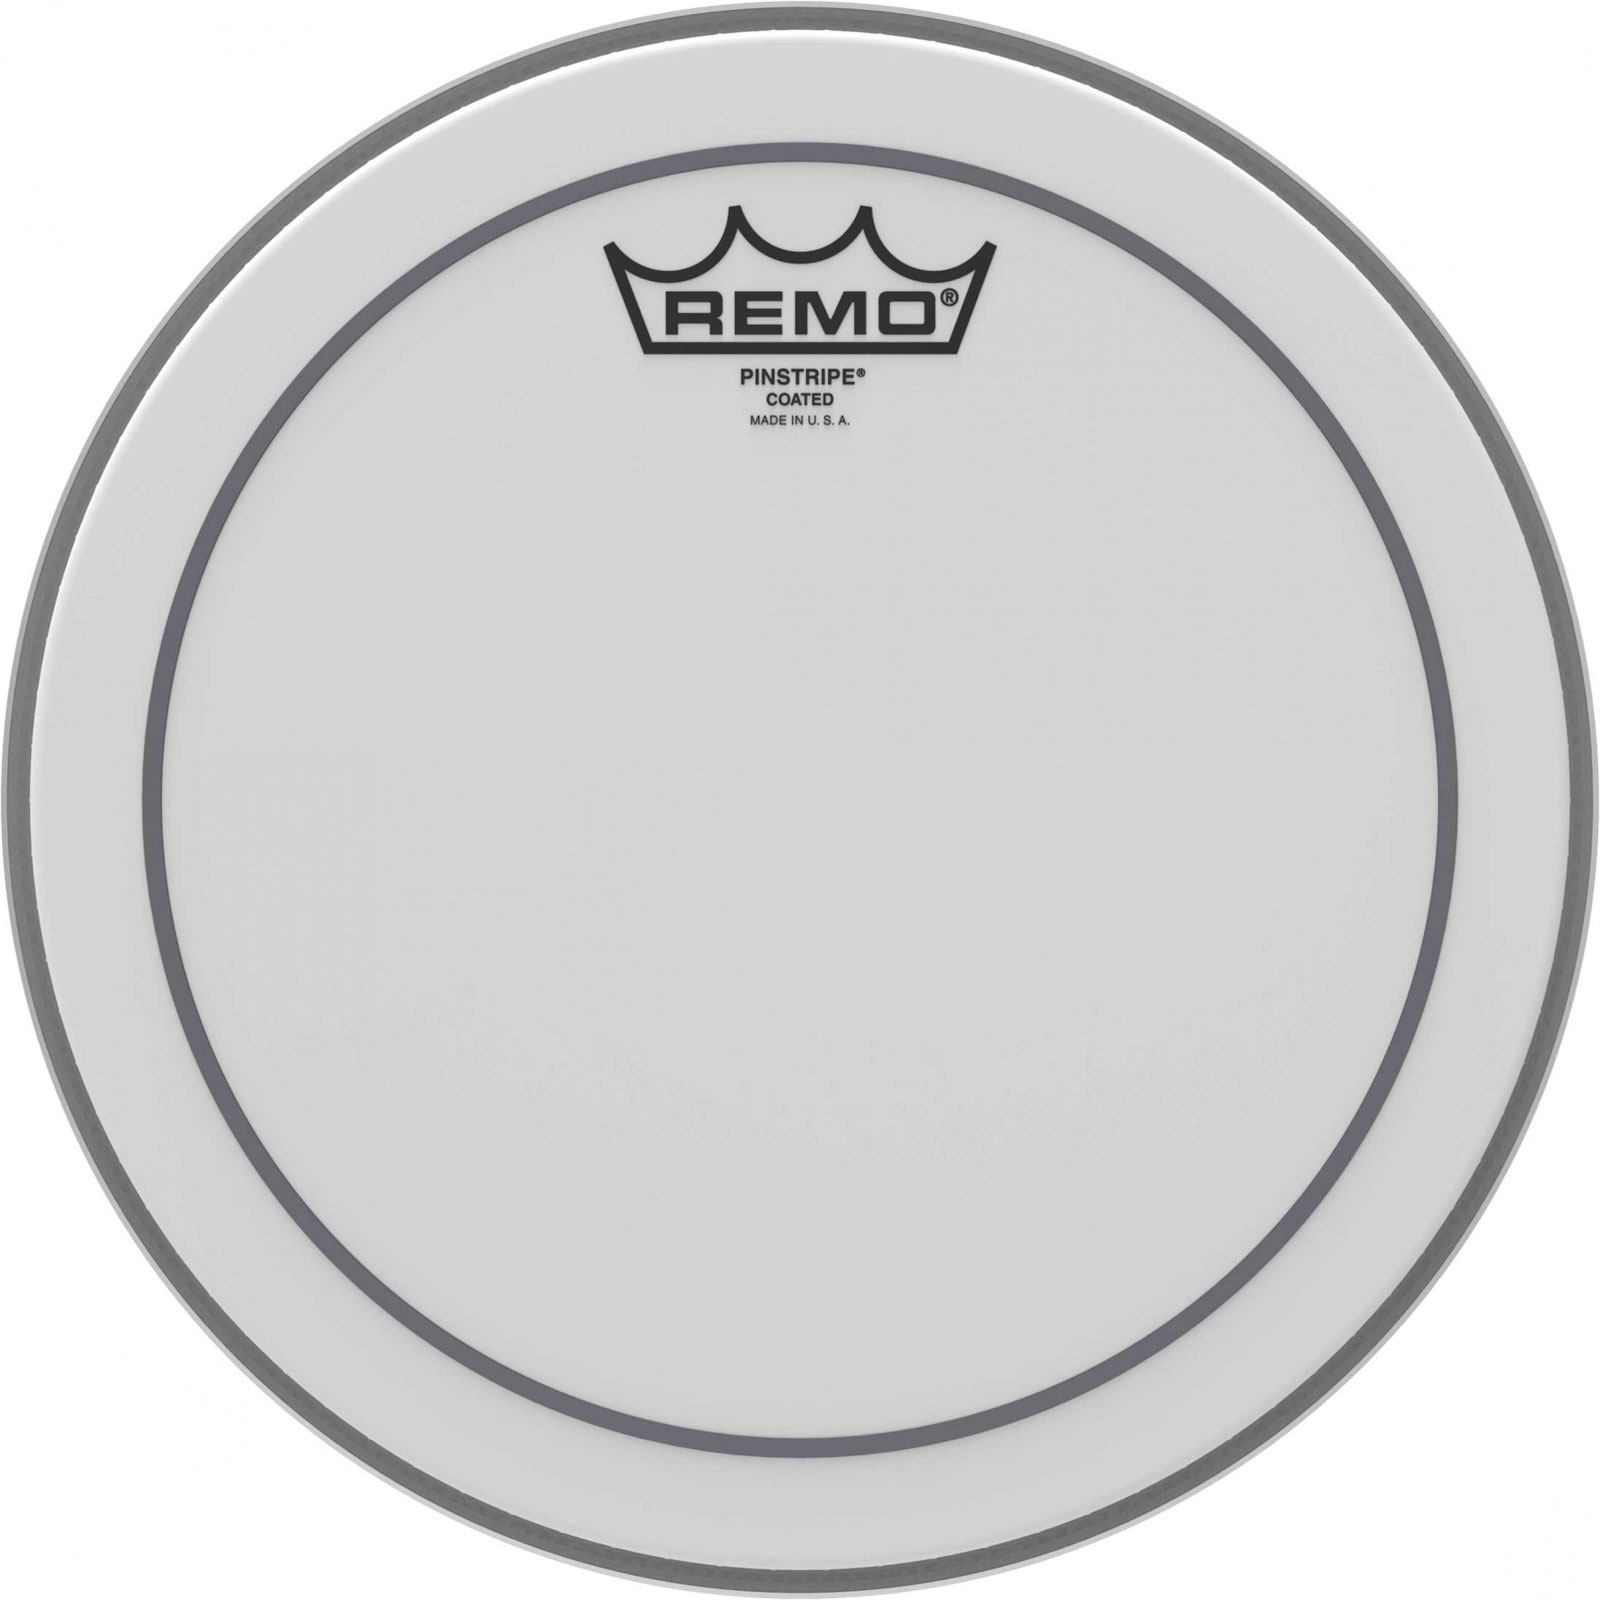 REMO PS-0110-00 - PINSTRIPE COATED 10